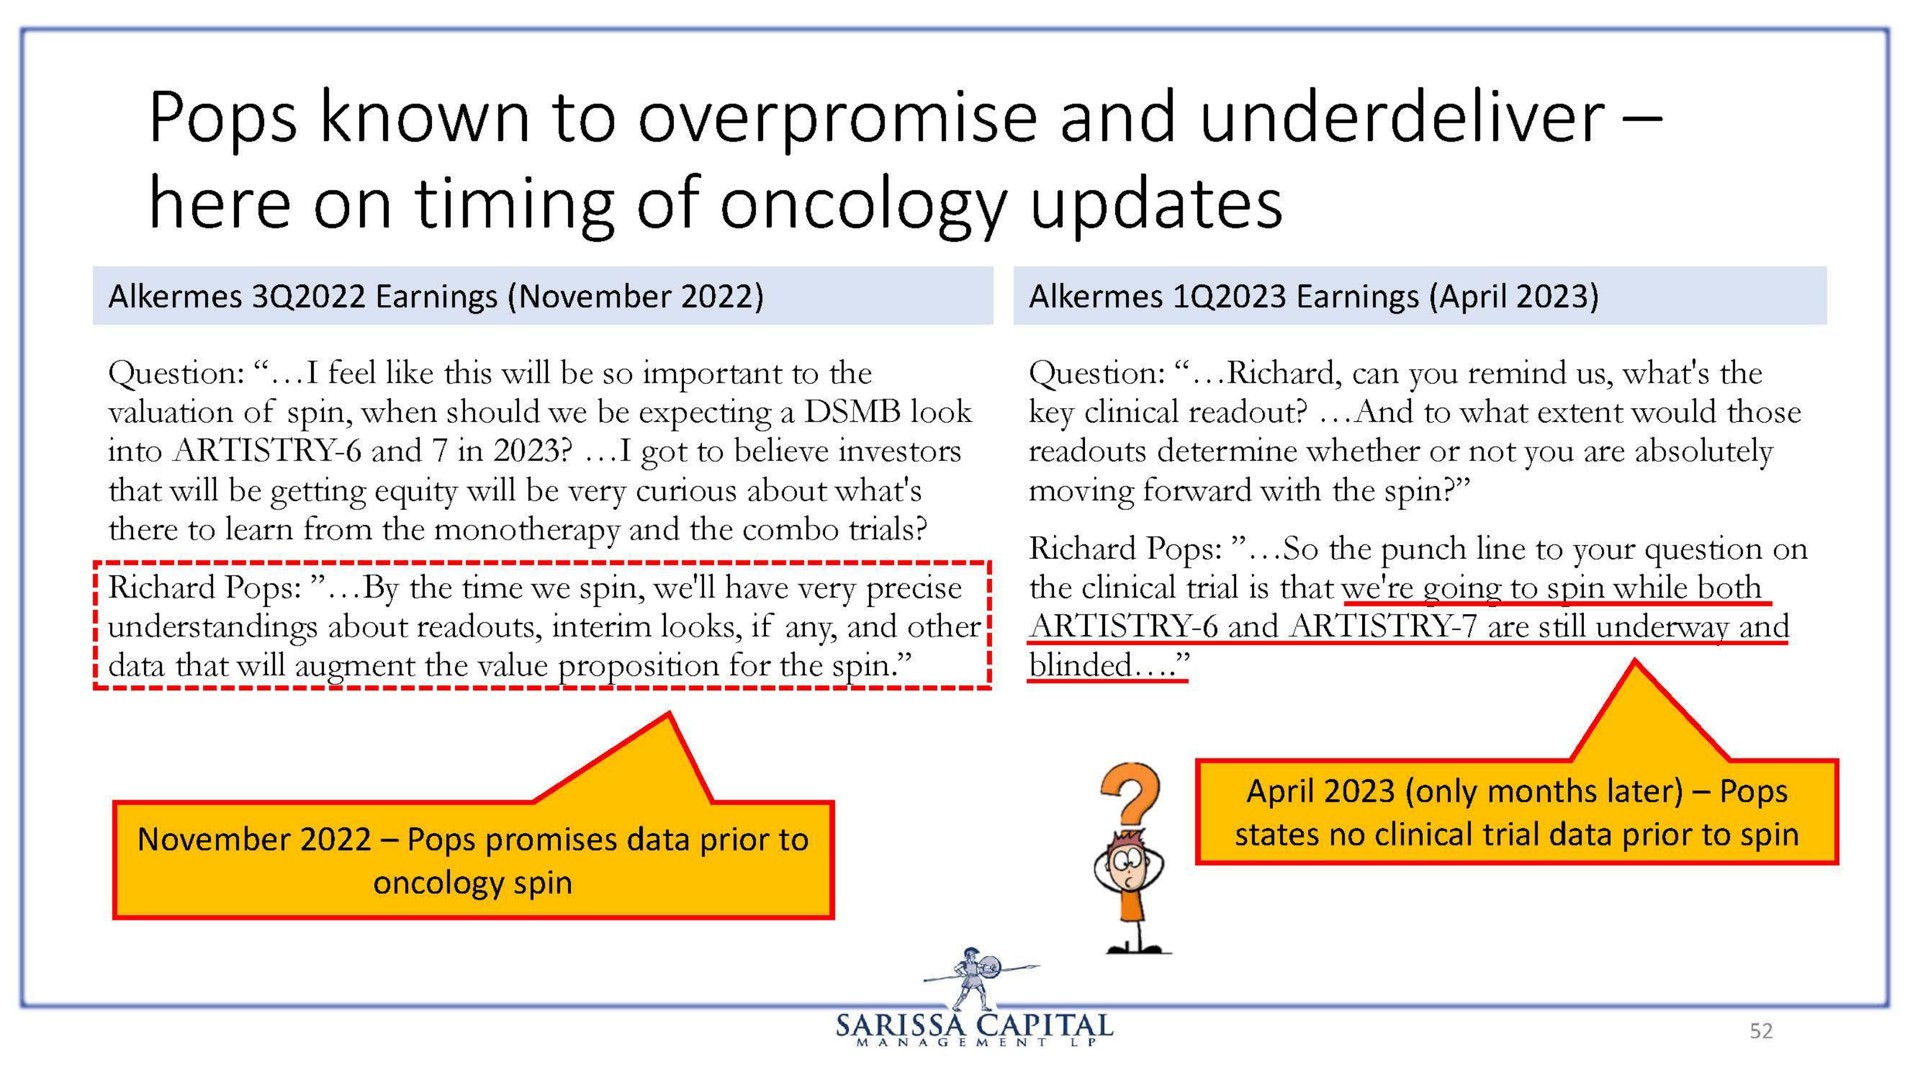 pops known to overpromise and here on timing of oncology updates | Sarissa Capital